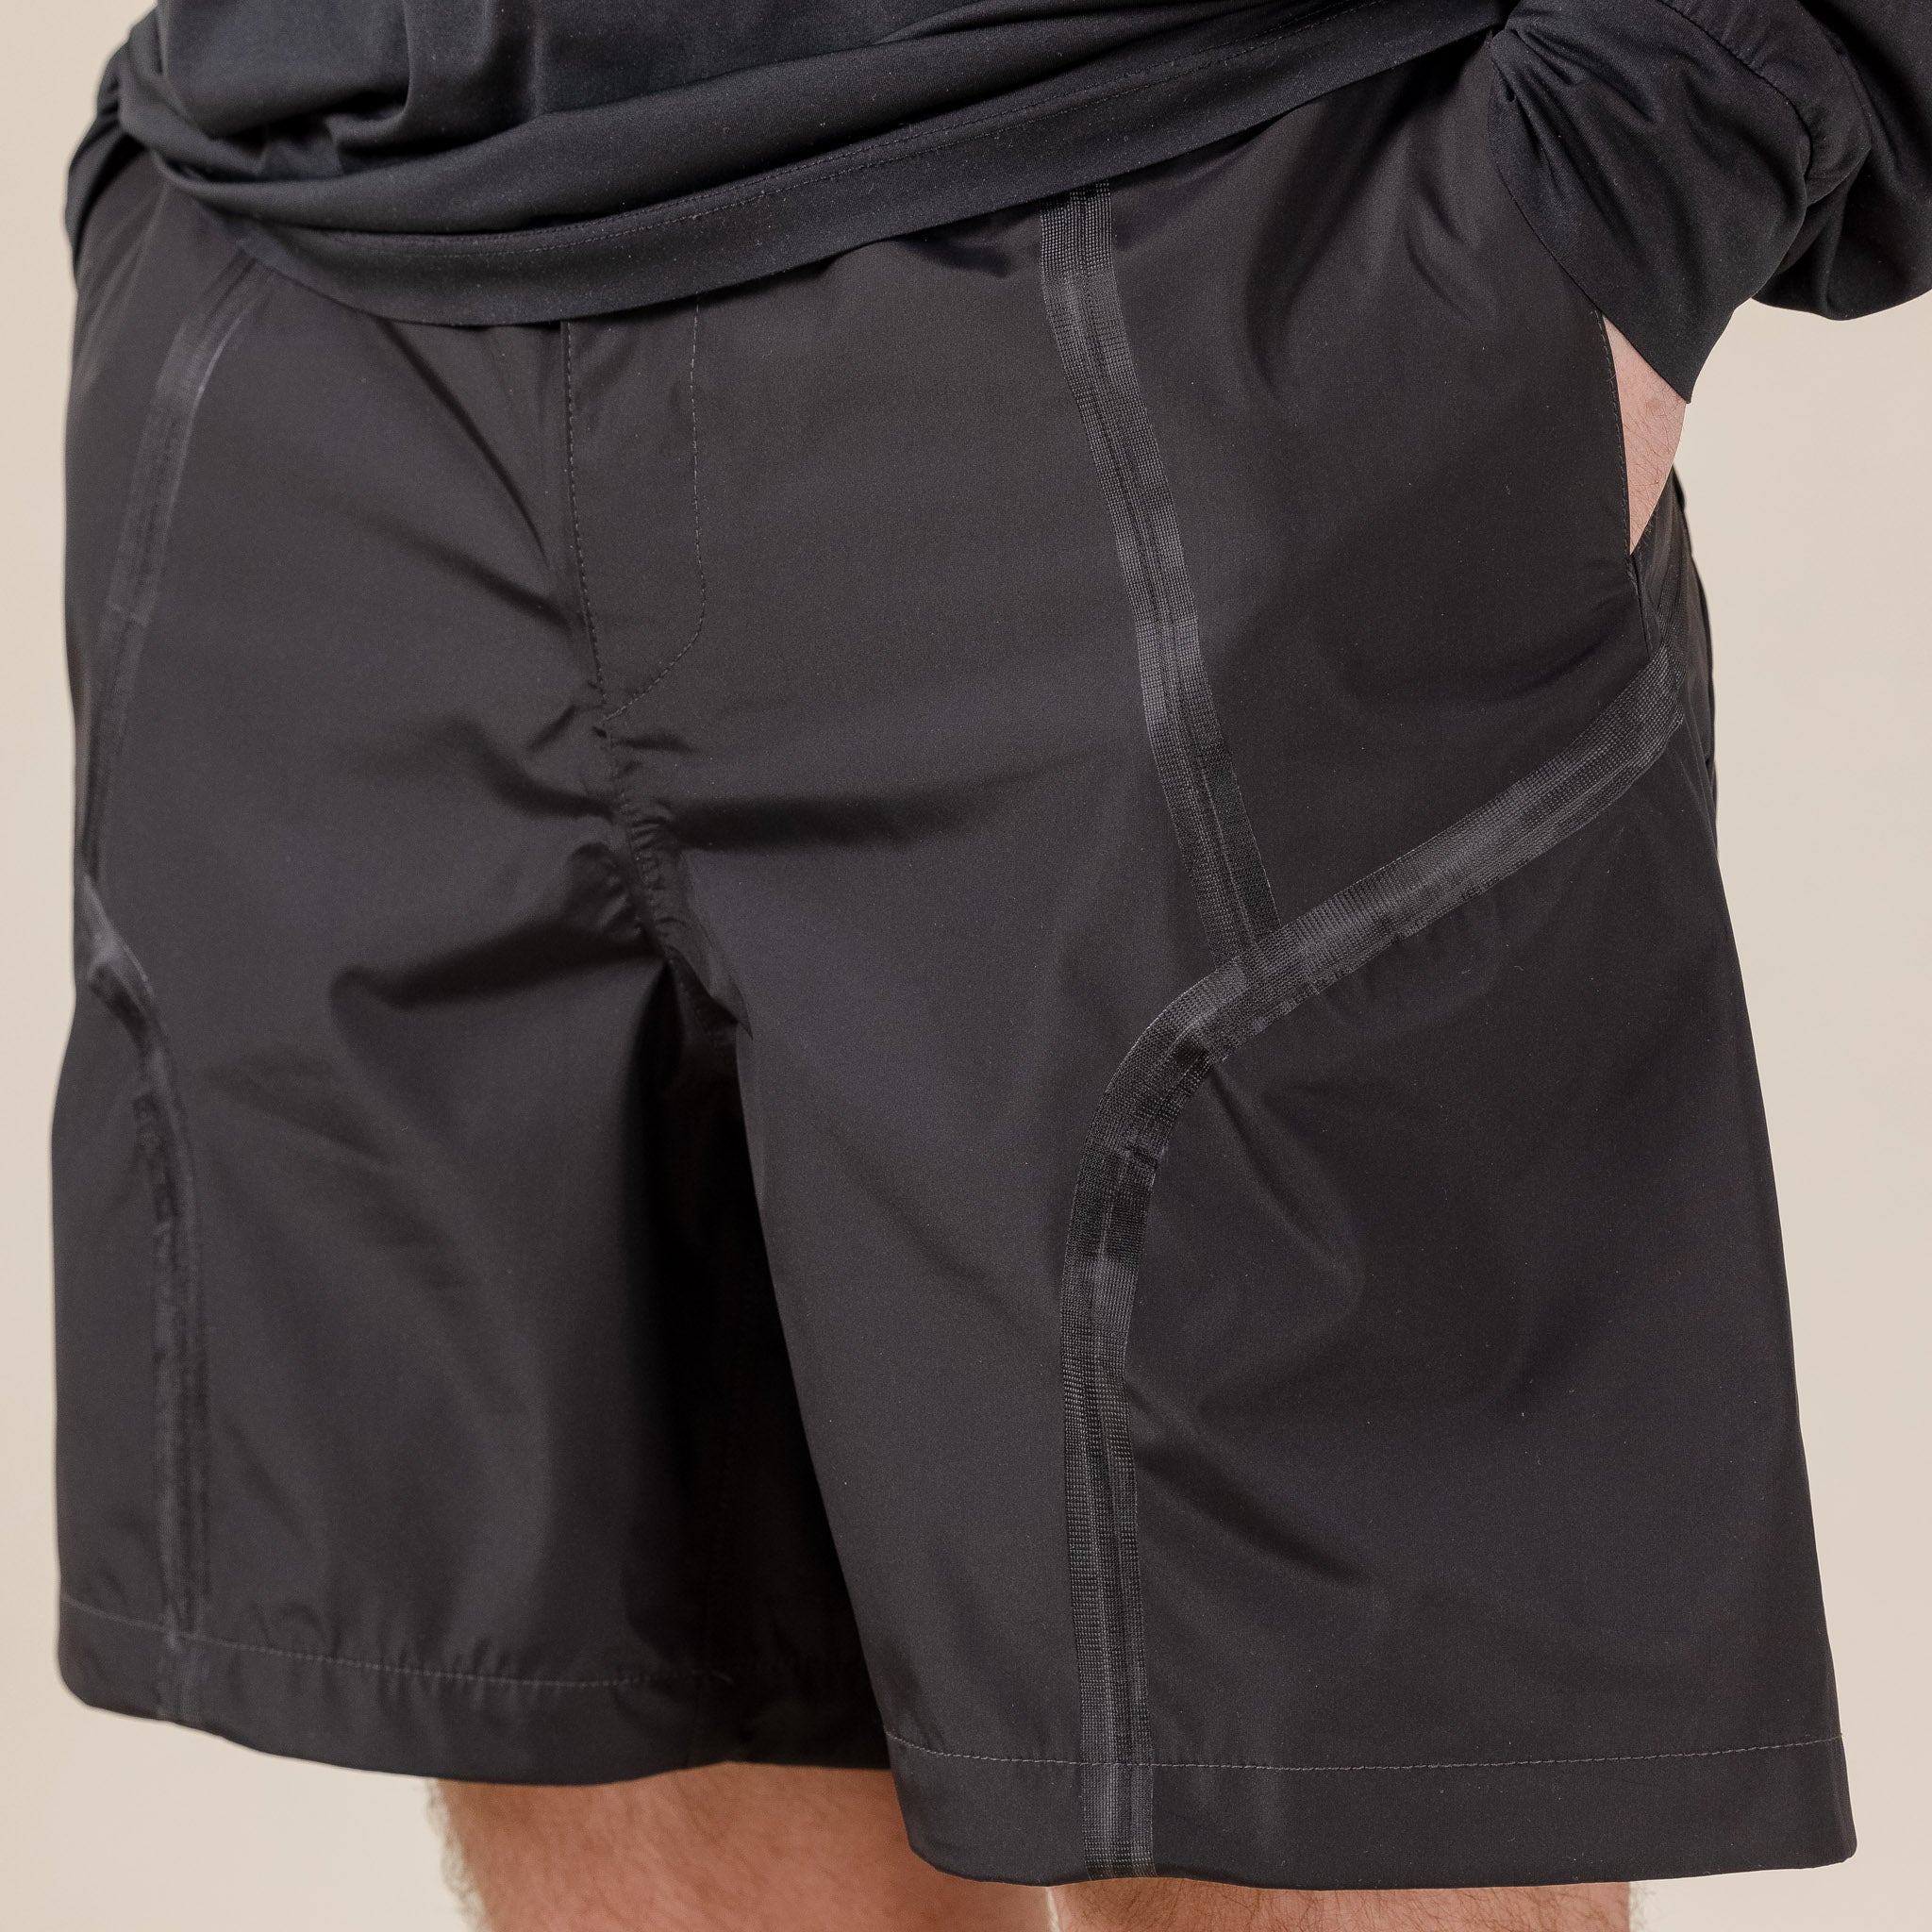 Welter Experiment - WSP003 Seam Sealed 3Layer Shorts - Charcoal Black "welter experiment stockists" "welter experiment uk" "welter experiment korea"